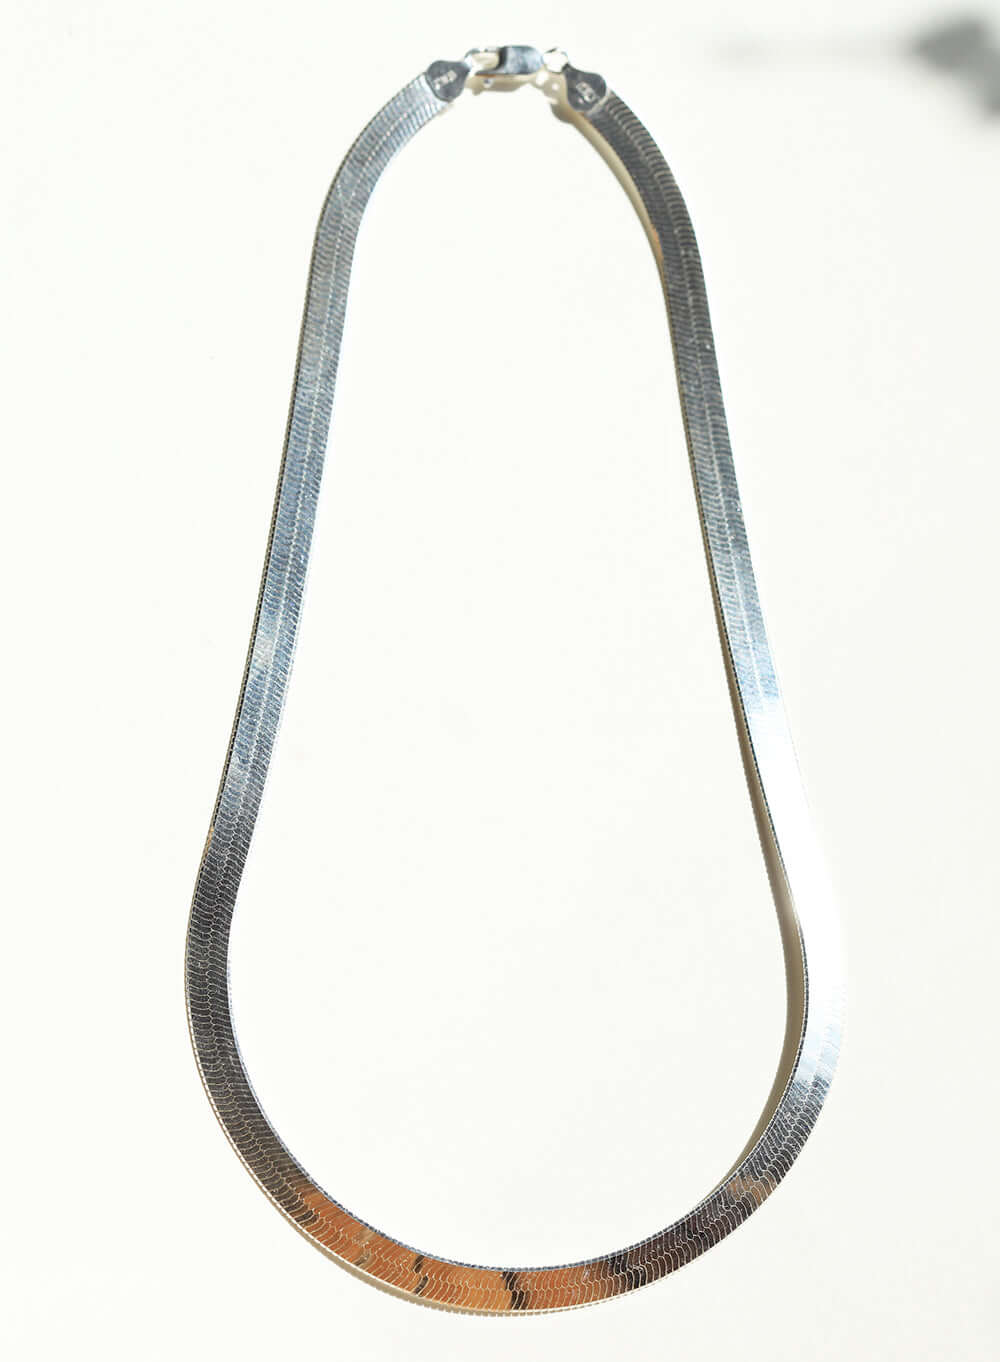 sterling silver herringbone necklace NYC fine jewelry brooklyn NY New York jeweler sustainable ethical greenpoint engagement